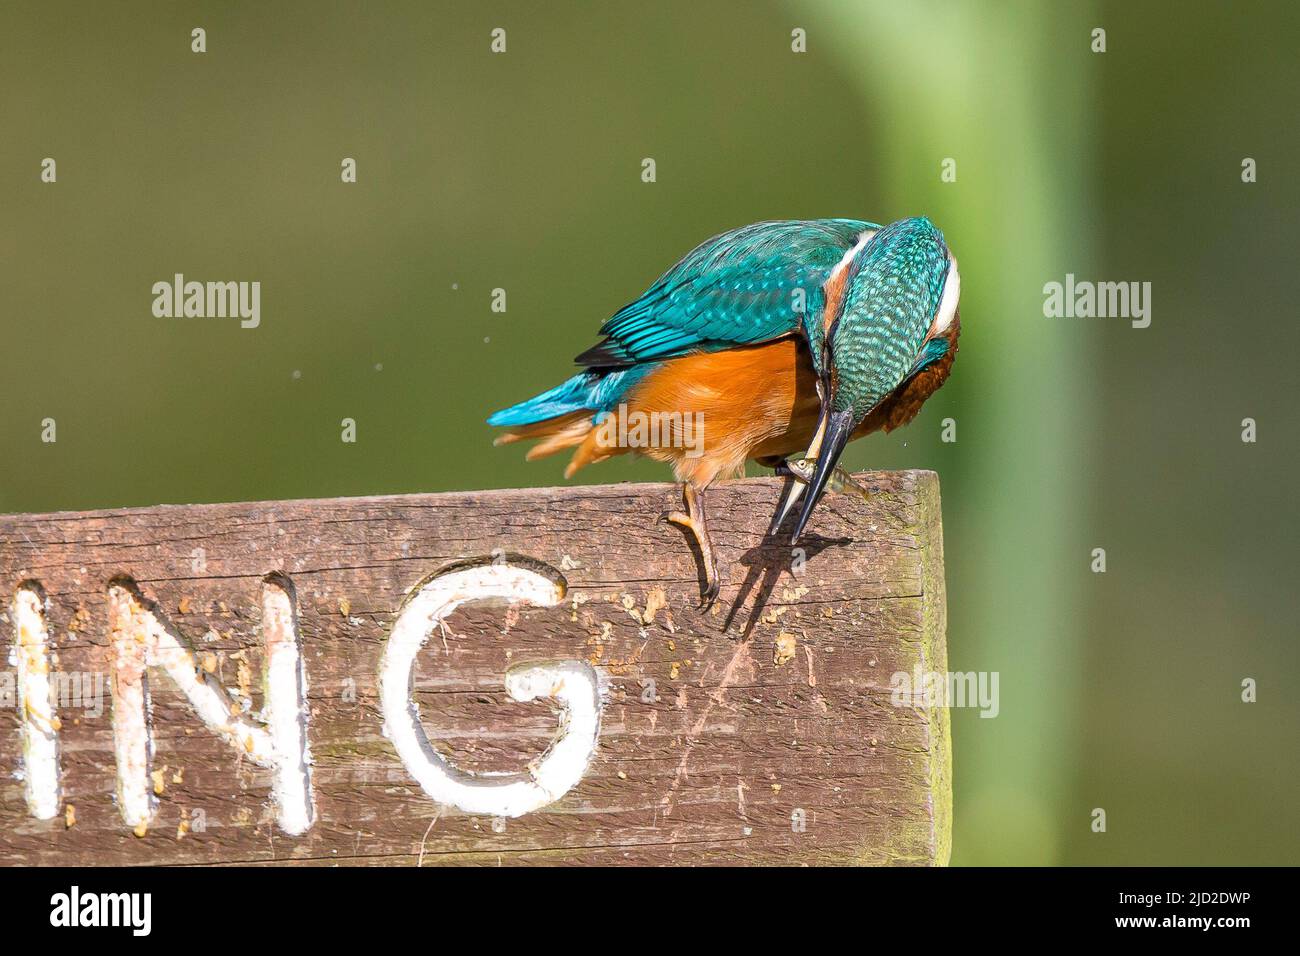 Arley, UK. 17th June, 2022. UK weather: very warm temperatures and bright skies offer the perfect time for a little fishing. This kingfisher bird successfully takes a fish from a fishing pool and enjoys its meal perching in the summer sunshine. Credit: Lee Hudson/Alamy Live News Stock Photo